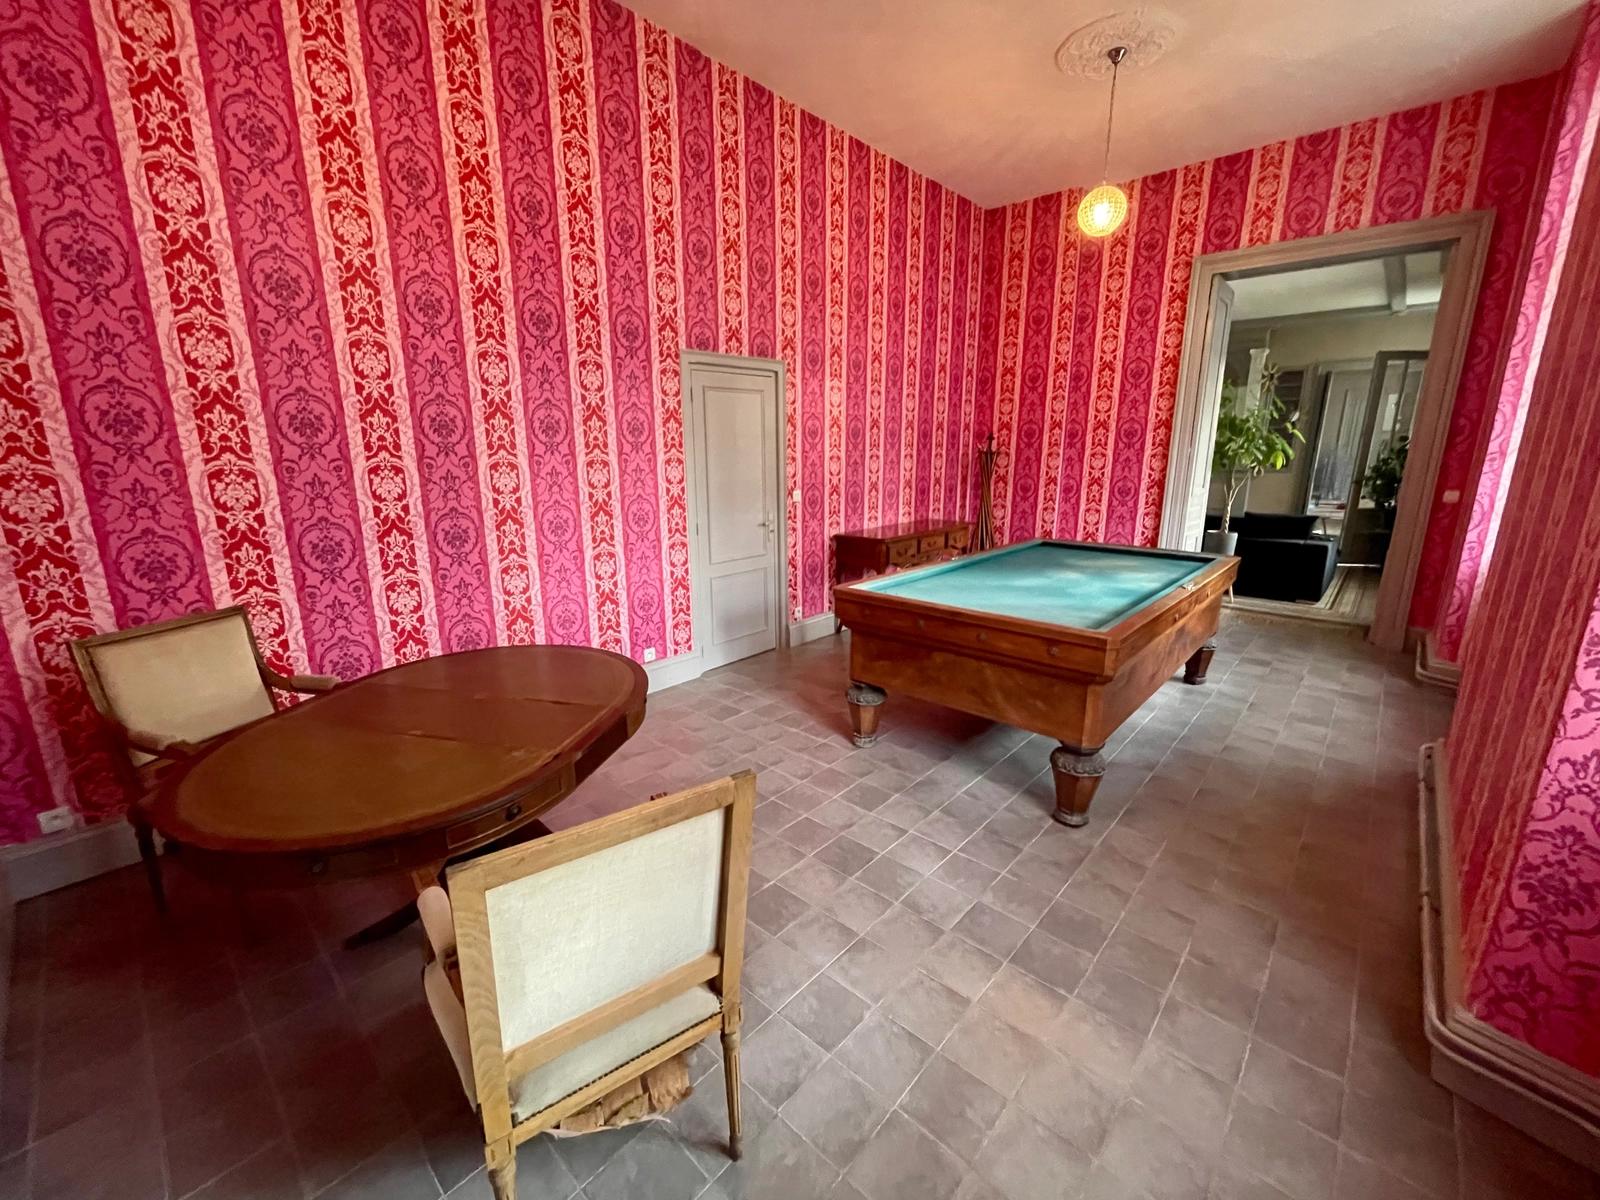 Bedroom in A seventeenth-century château and park - 5